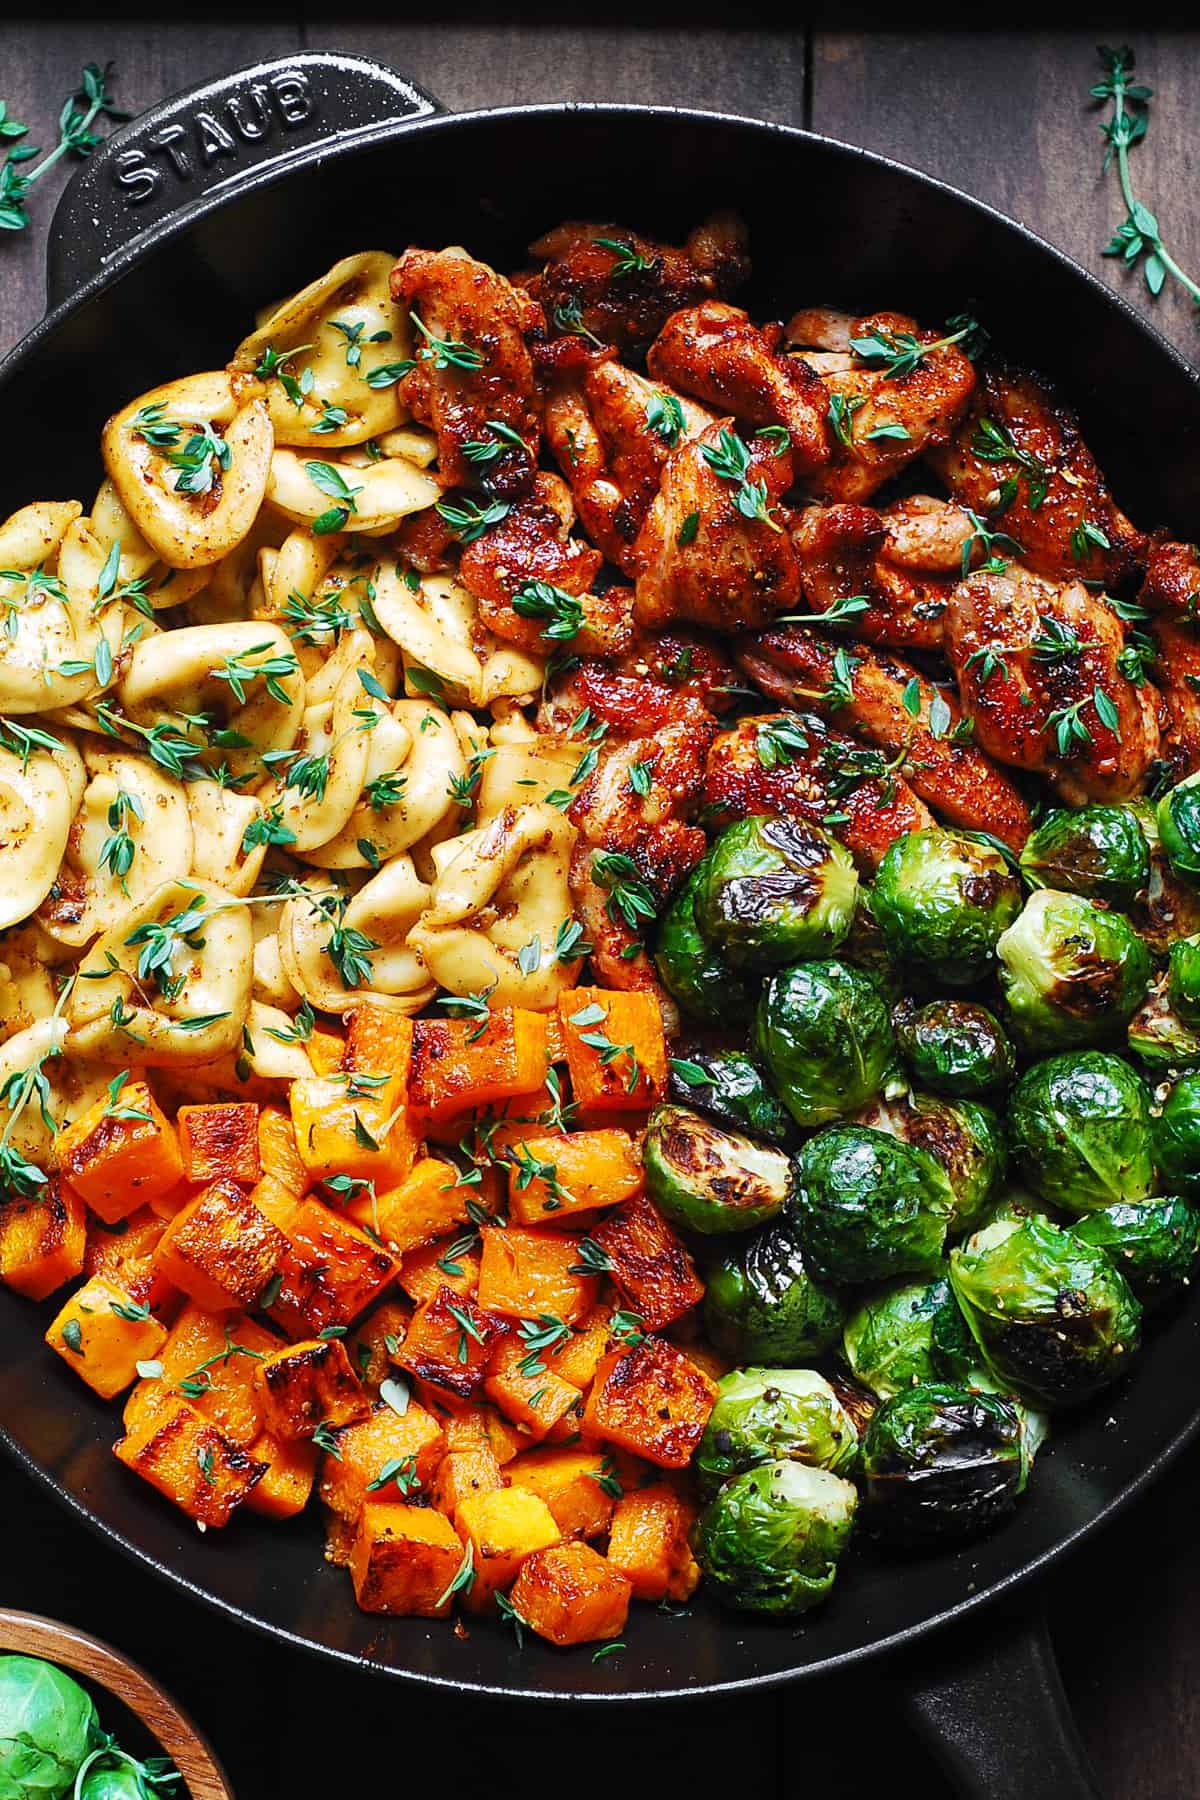 seared chicken, tortellini with roasted butternut squash and brussels sprouts in a cast-iron pan